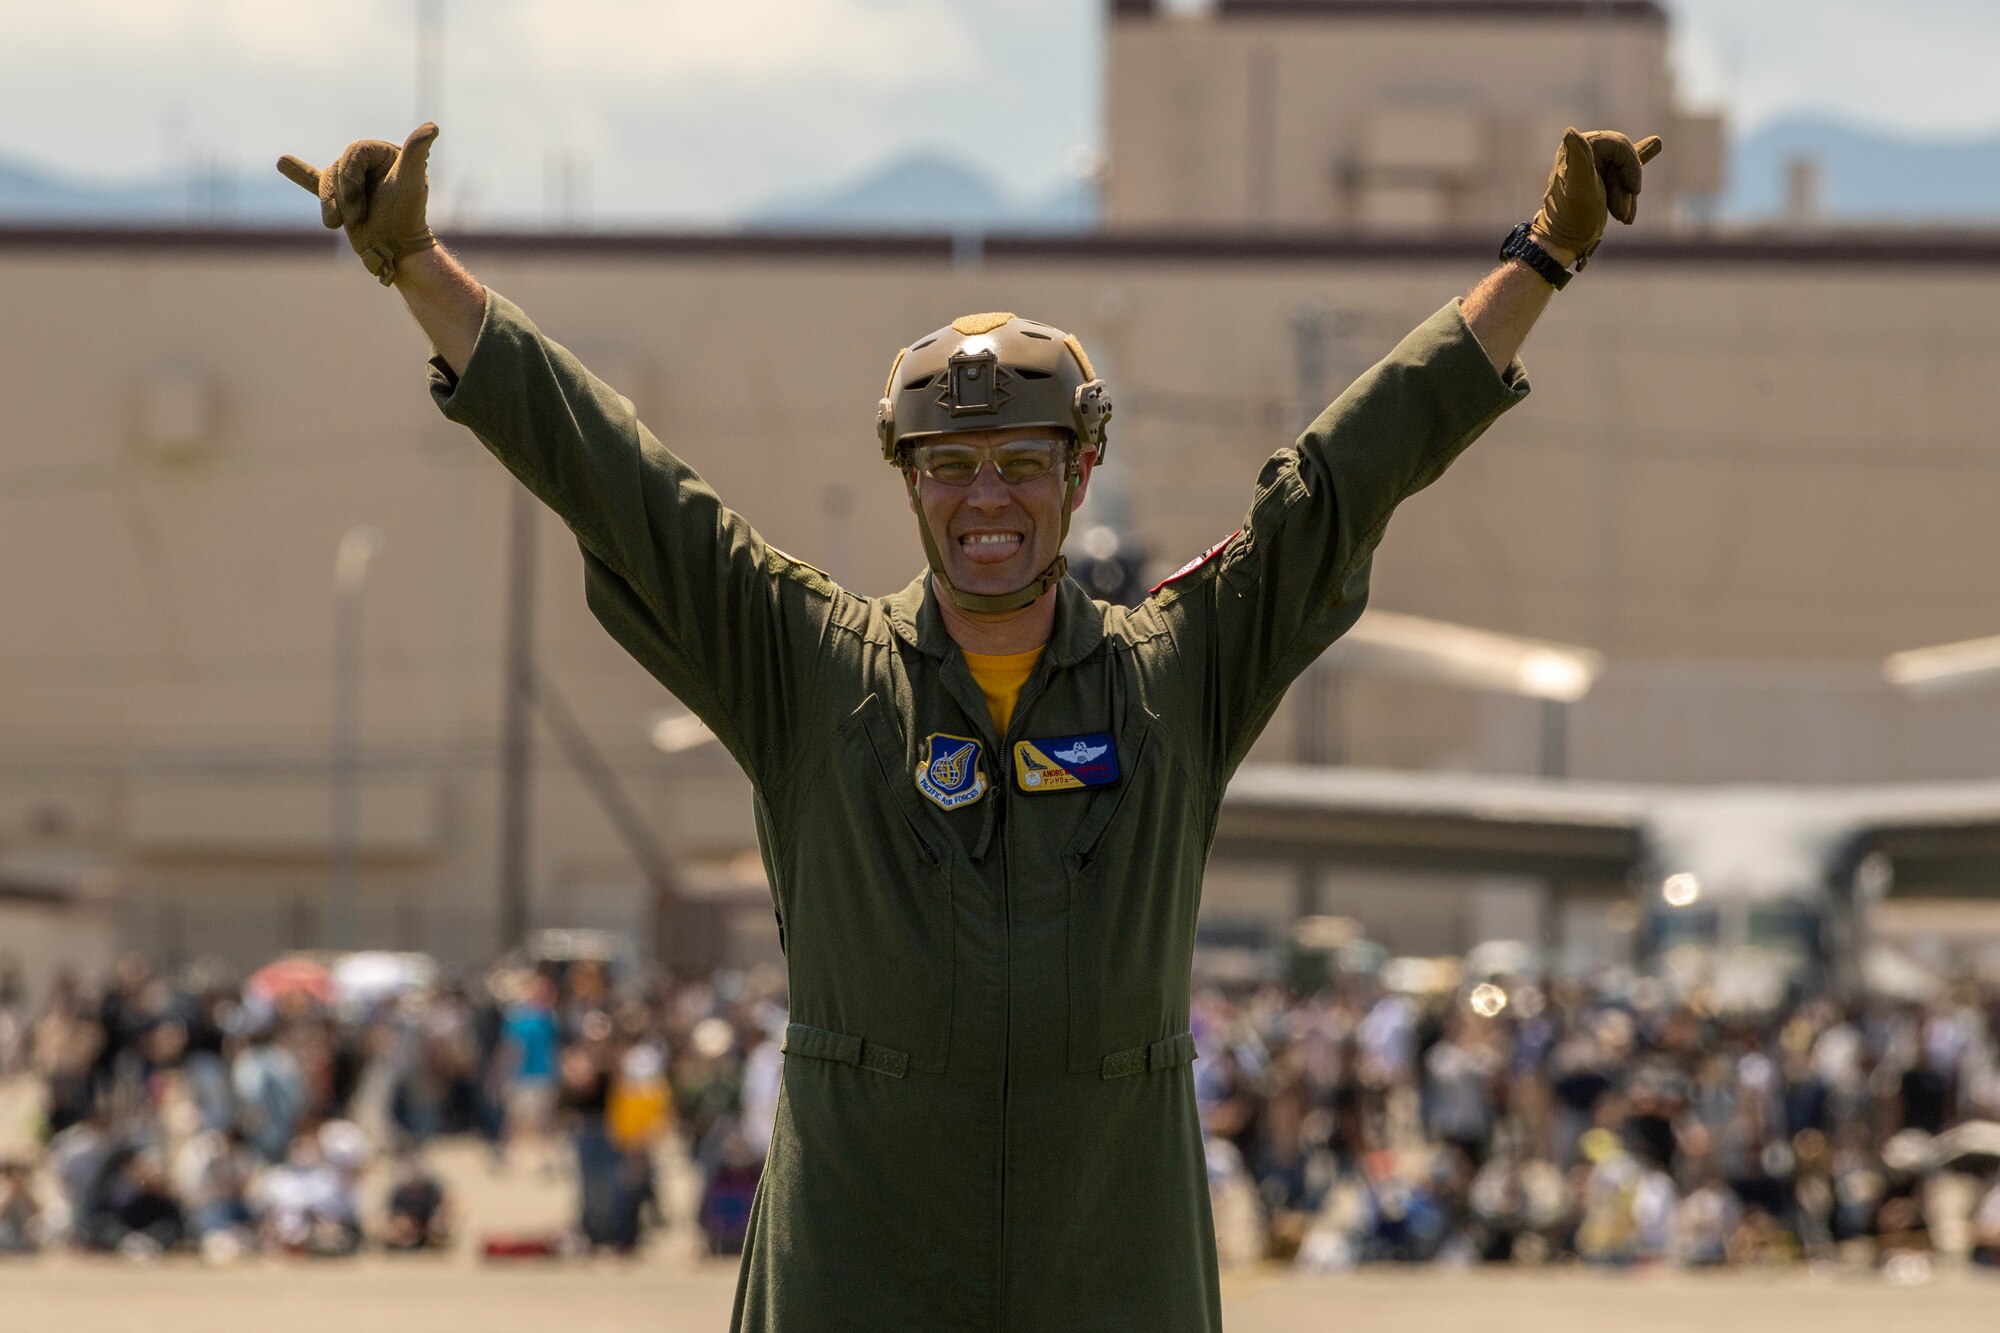 Col. Andrew Campbell, 374th Airlift Wing commander, poses for a photo while waiting to participate in a UH-1 rescue demonstration during the Friendship Festival 2022, at Yokota Air Base, Japan, May 22, 2022. The two-day festival was an opportunity for visitors to learn more about the U.S. and Japan bilateral partnership, while strengthening the bonds between Yokota and the local communities. Yokota was able to host the event with the support of Japanese Self-Defense Force, sister services and the local community. (U.S. Air Force photo by Staff Sgt. Ryan Lackey)